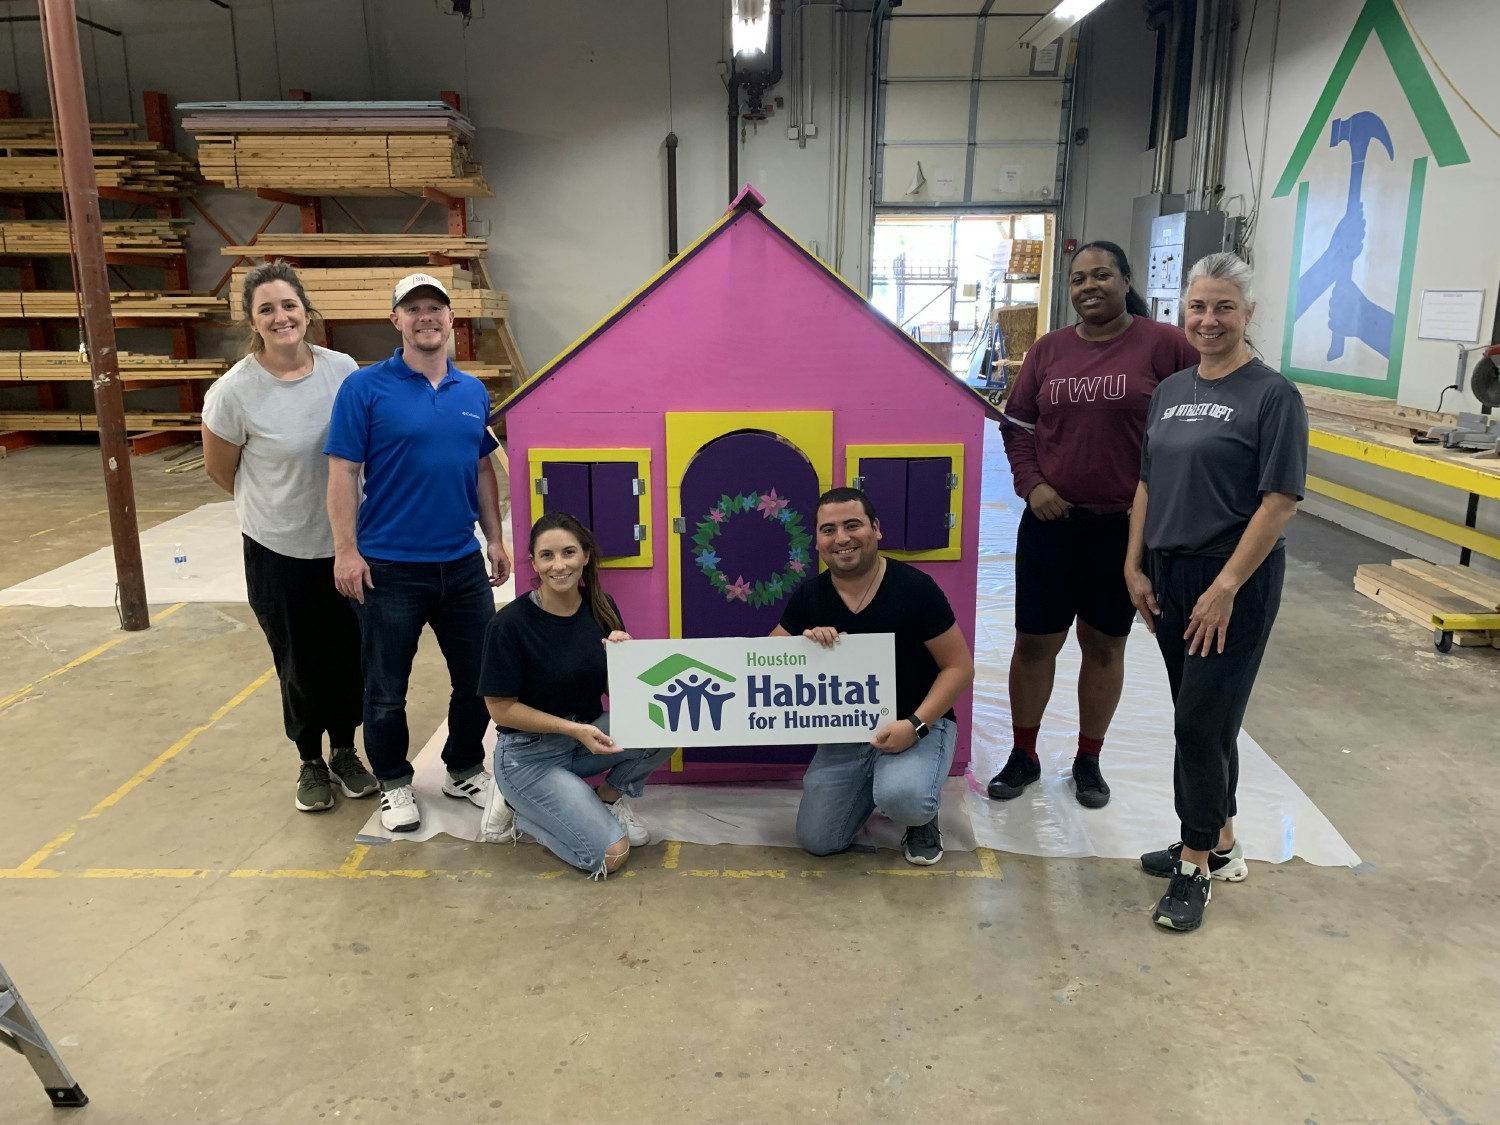 Habitat for Humanity, enough said. We LOVE to give back to our community